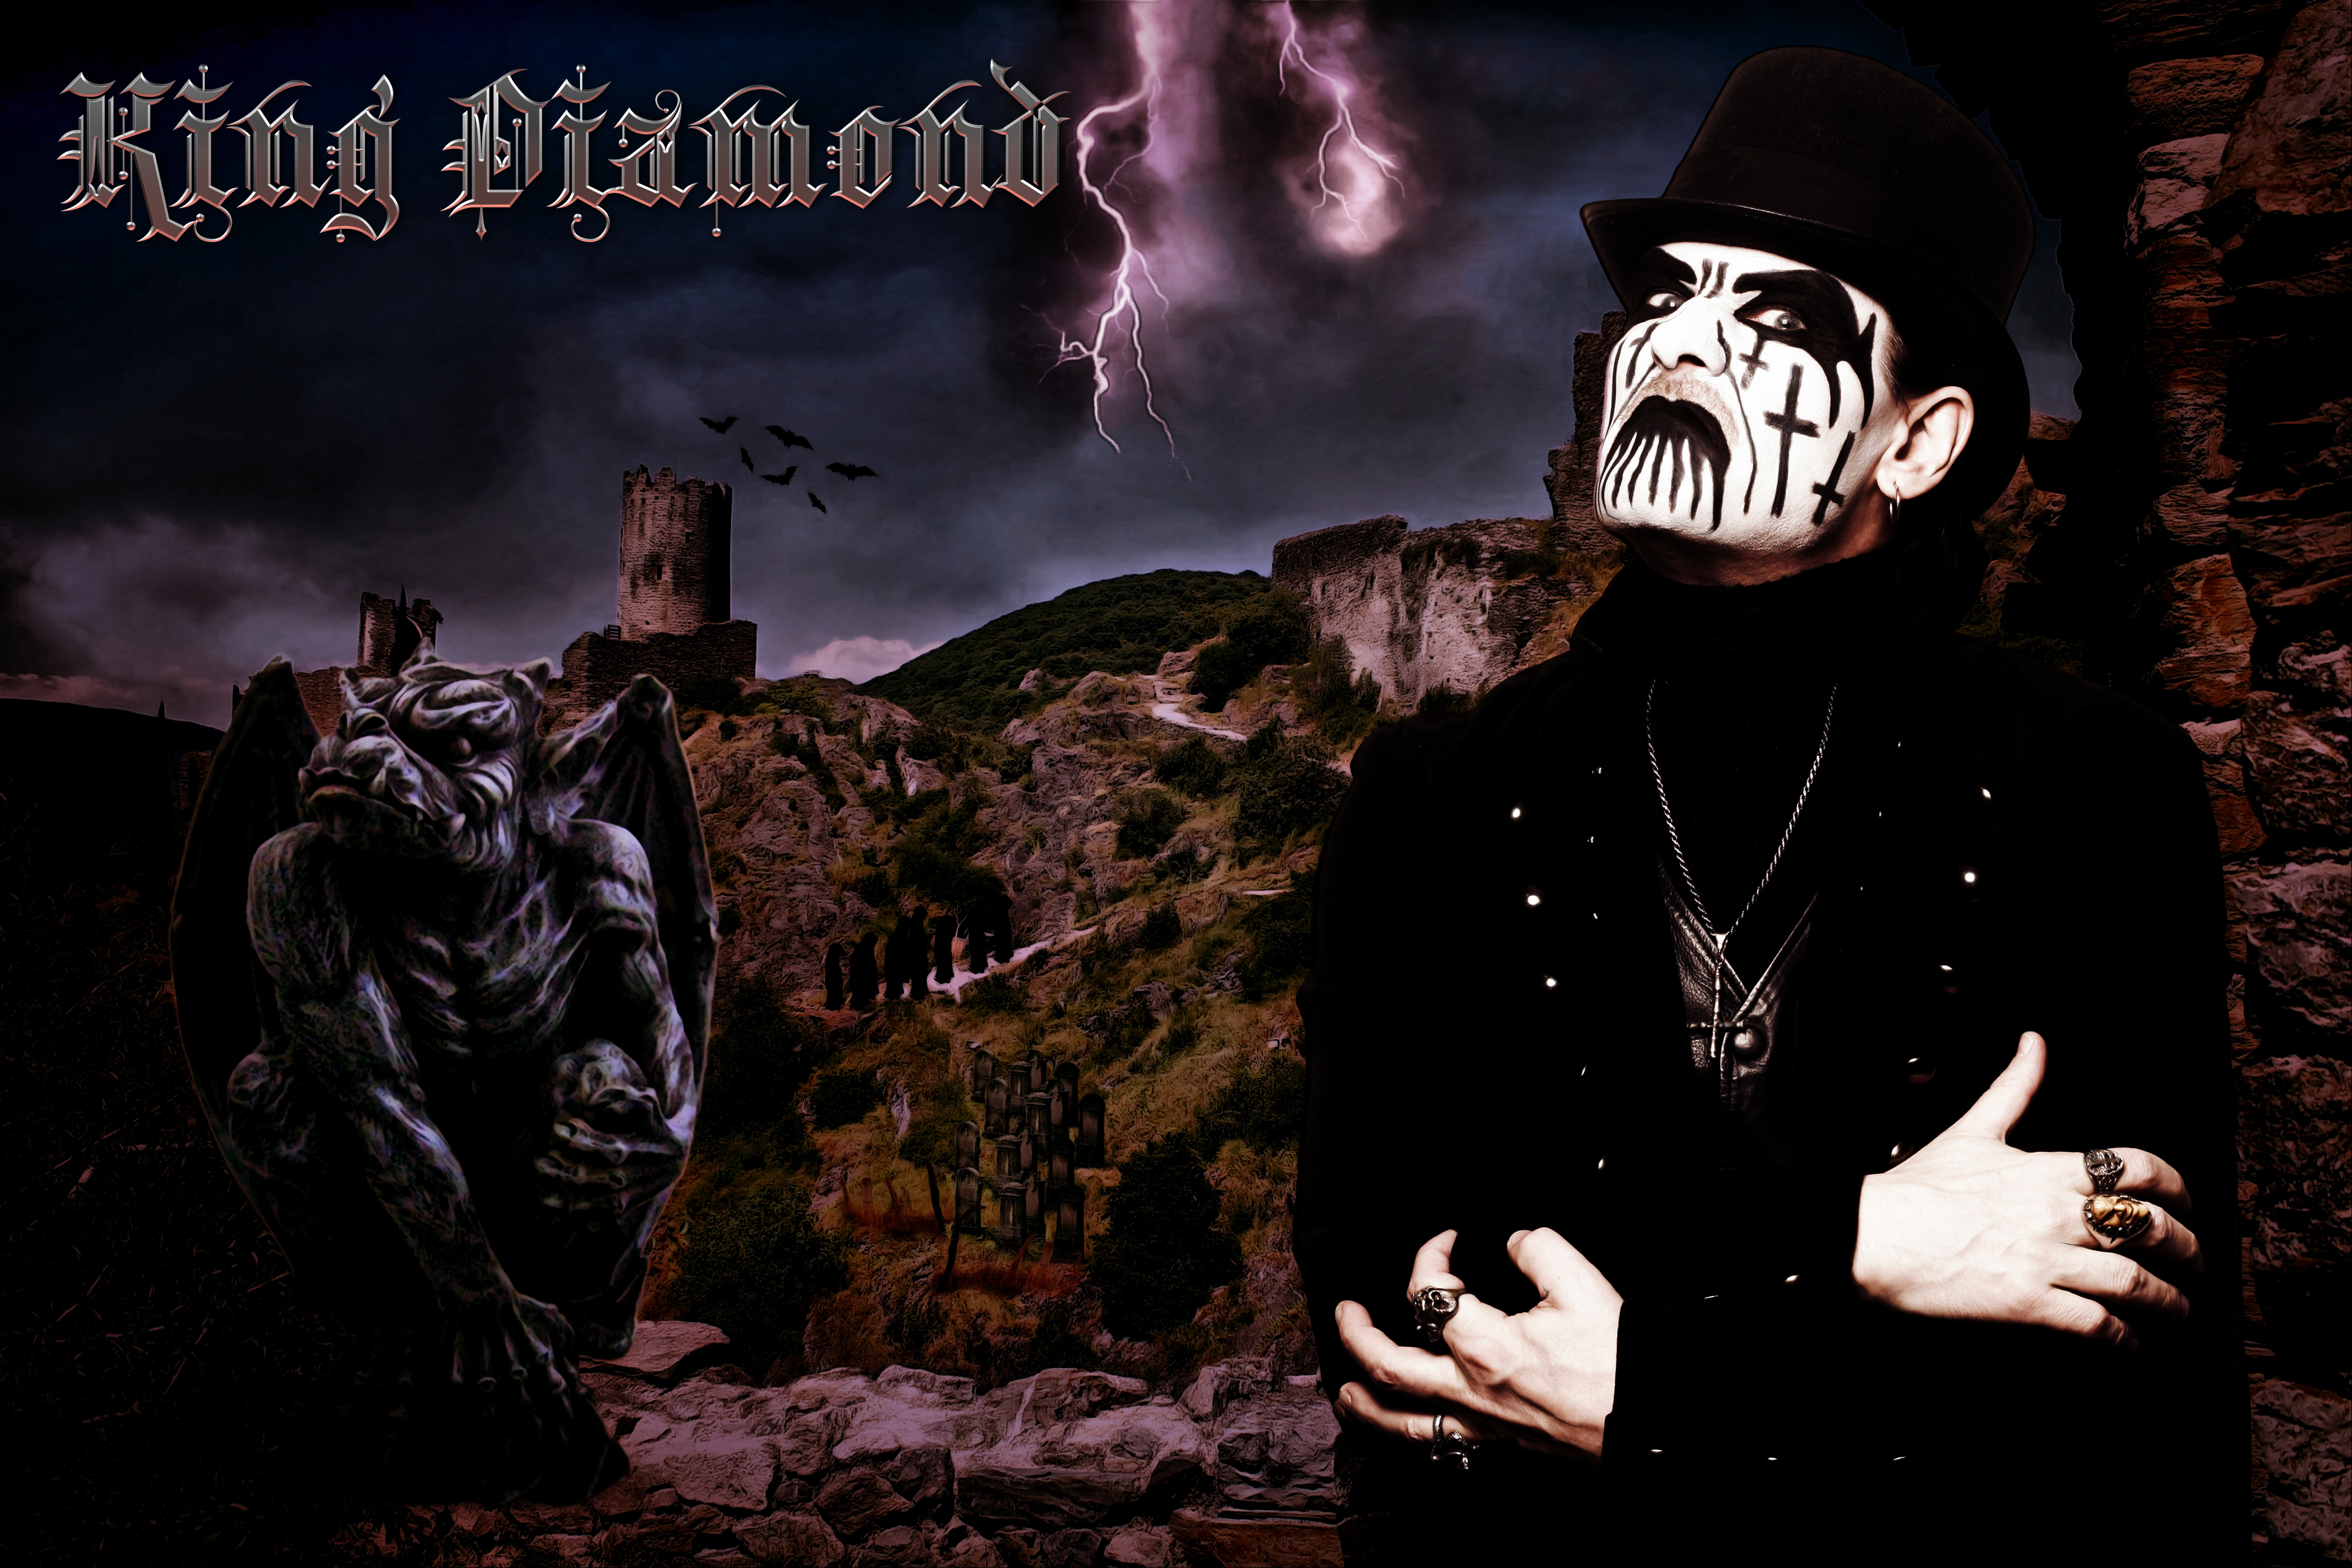 Related Keywords Amp Suggestions For King Diamond Wallpaper